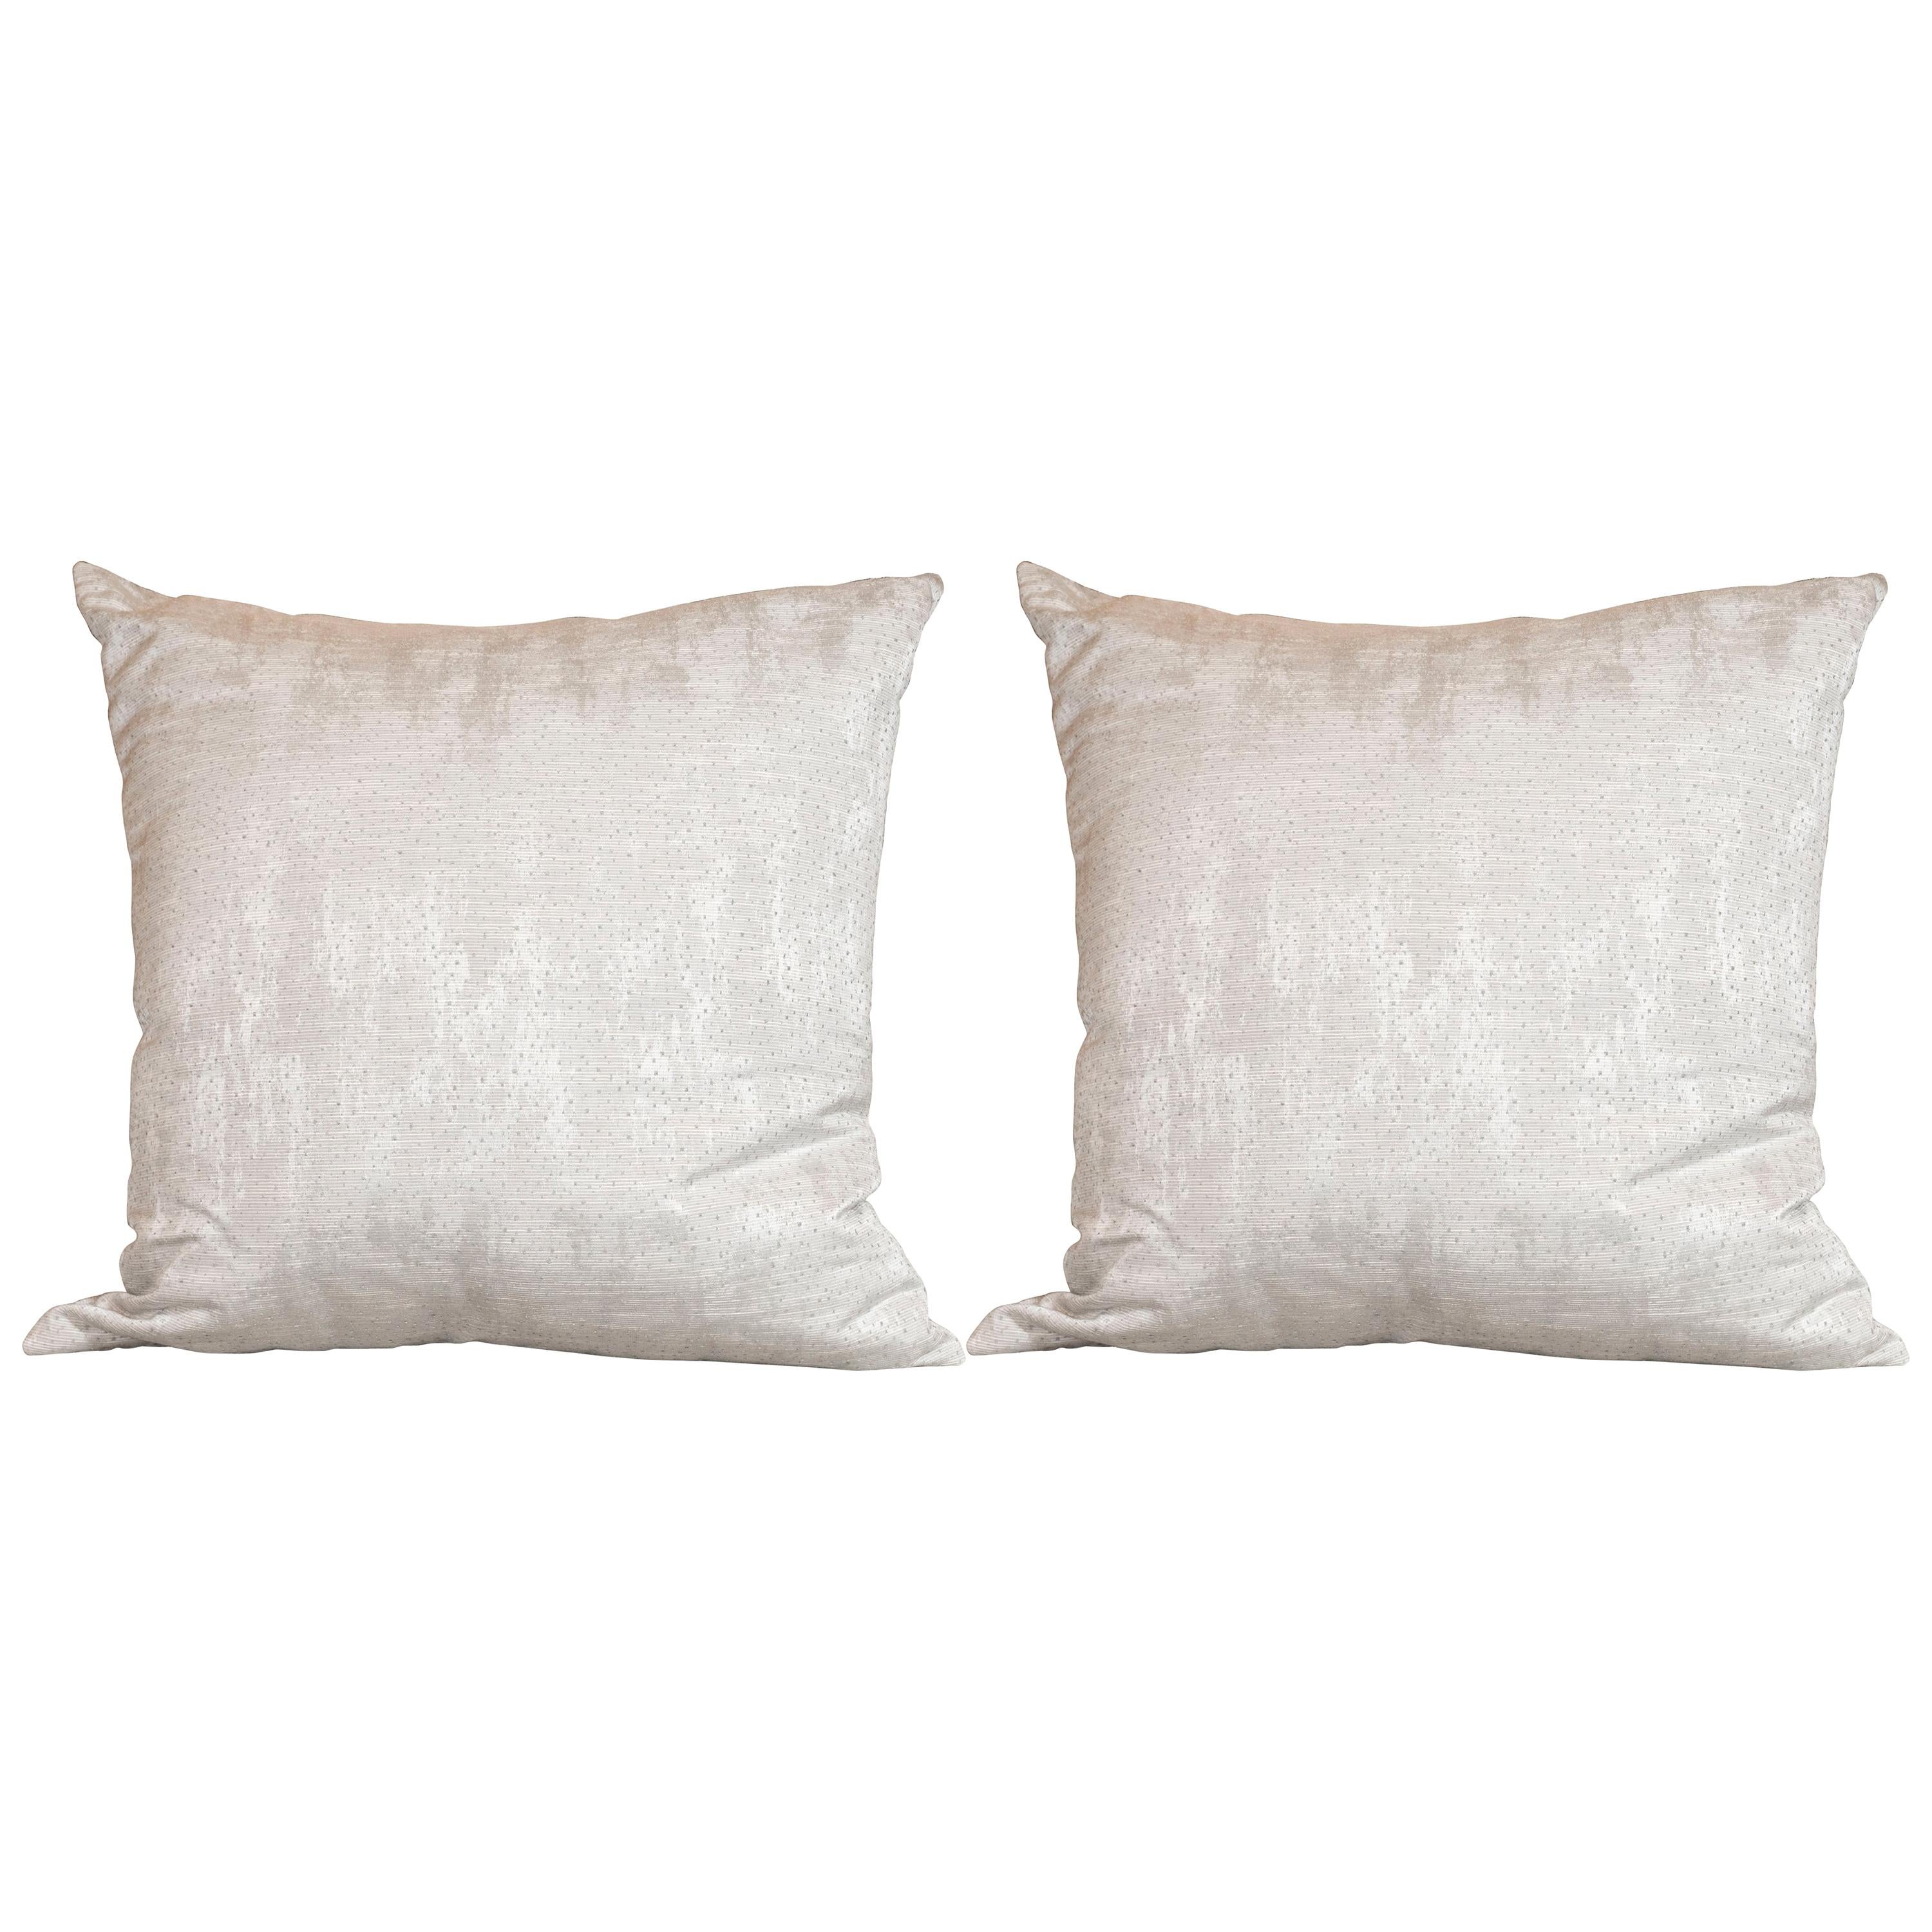 Pair of Modernist Striated and Tufted Gray Pillows For Sale